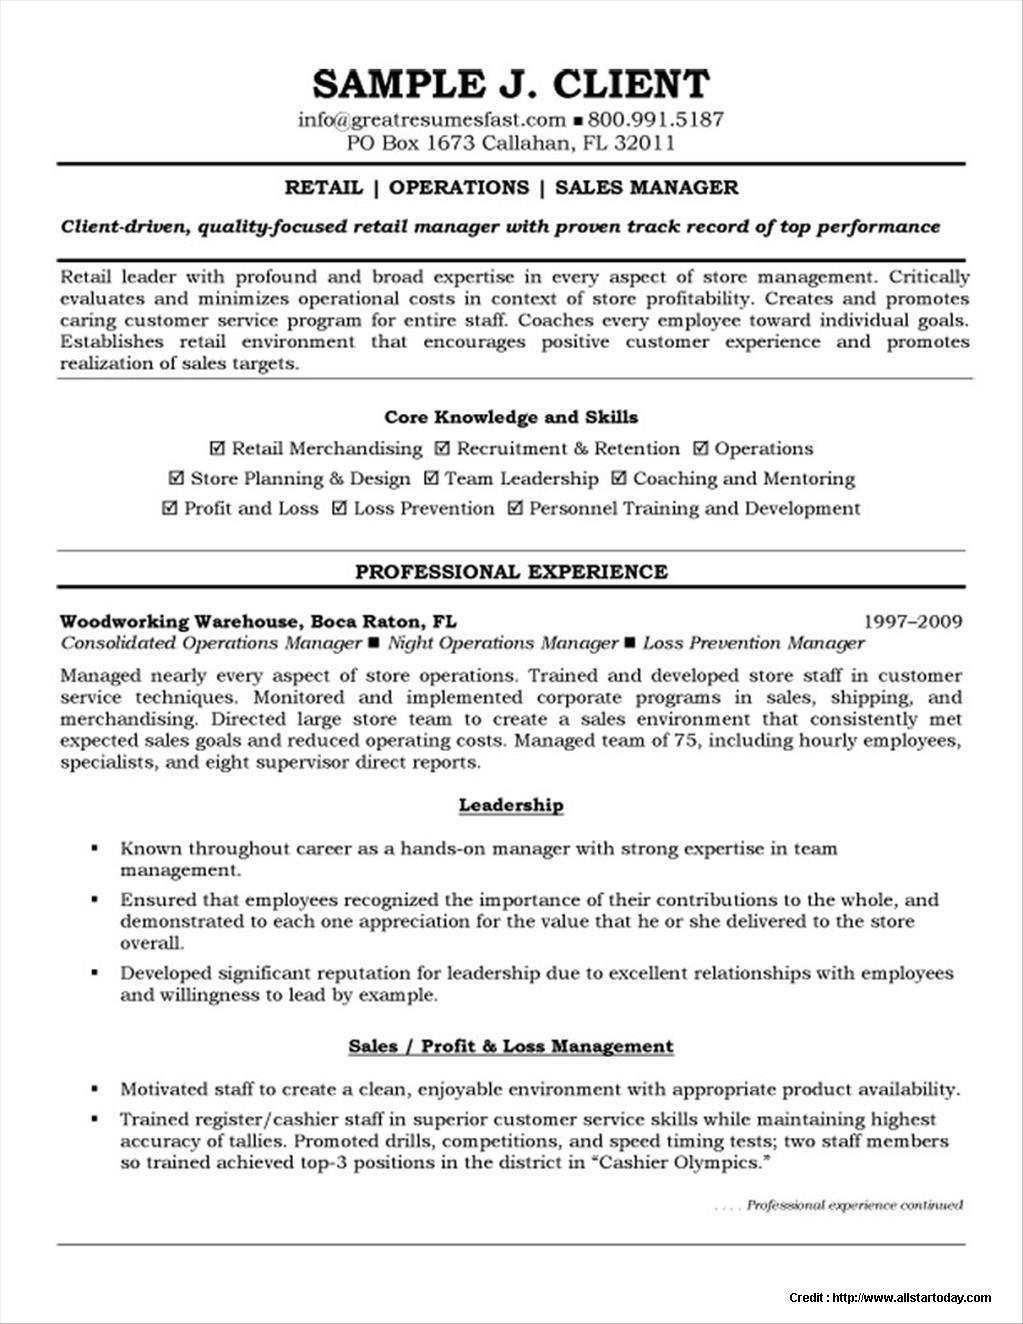 Sample Resume for Retail Operations Manager Warehouse Resume Template Free 2019 Warehouse Manager Resume …